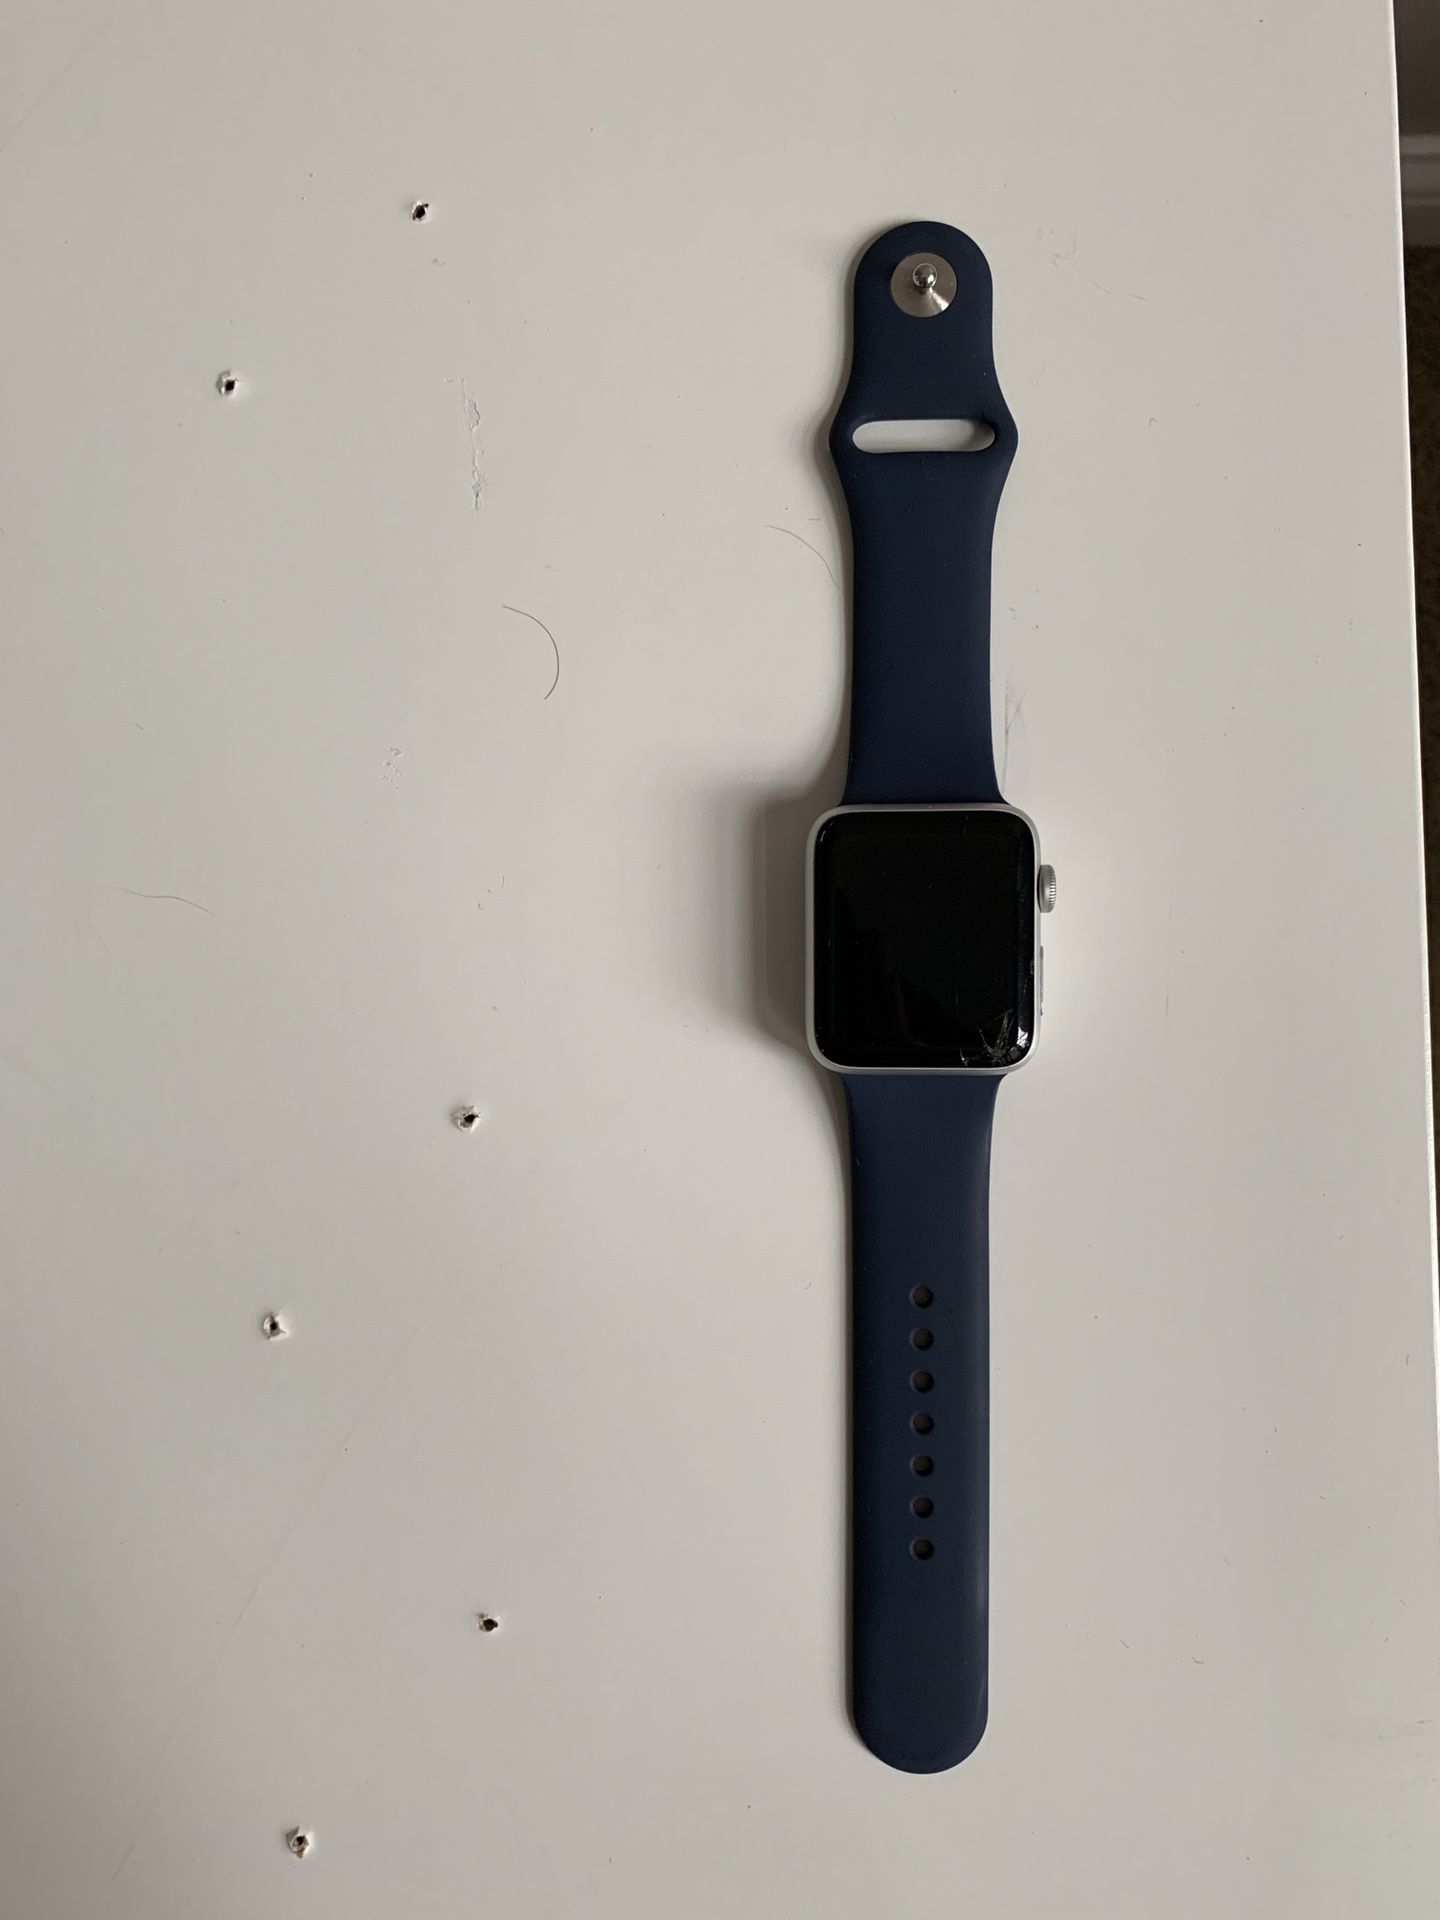 Apple Watch Series 2 42 MM Aluminum Case for Sale in Naperville